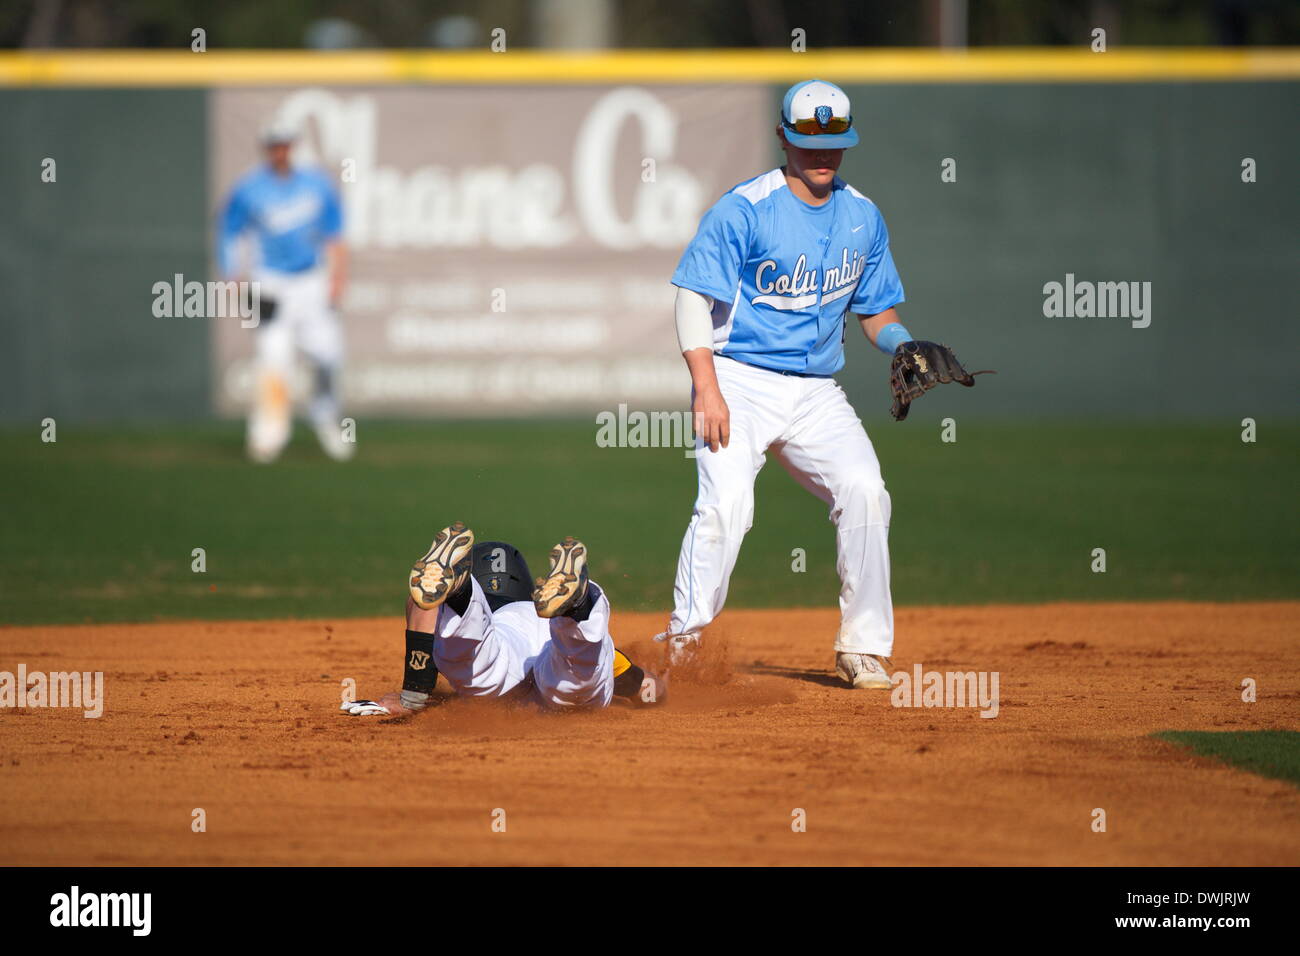 Kennesaw, Georgia, USA.  March 8, 2014 -- Columbia secondbaseman Kyle Bartelman (6) during Saturday's doubleheader between Columbia University and Kennesaw State University. The teams split the doubleheader.  Columbia one the first game 9-3.  KSU won the night cap 15-1. Credit:  Wayne Hughes | Alamy Live News Stock Photo